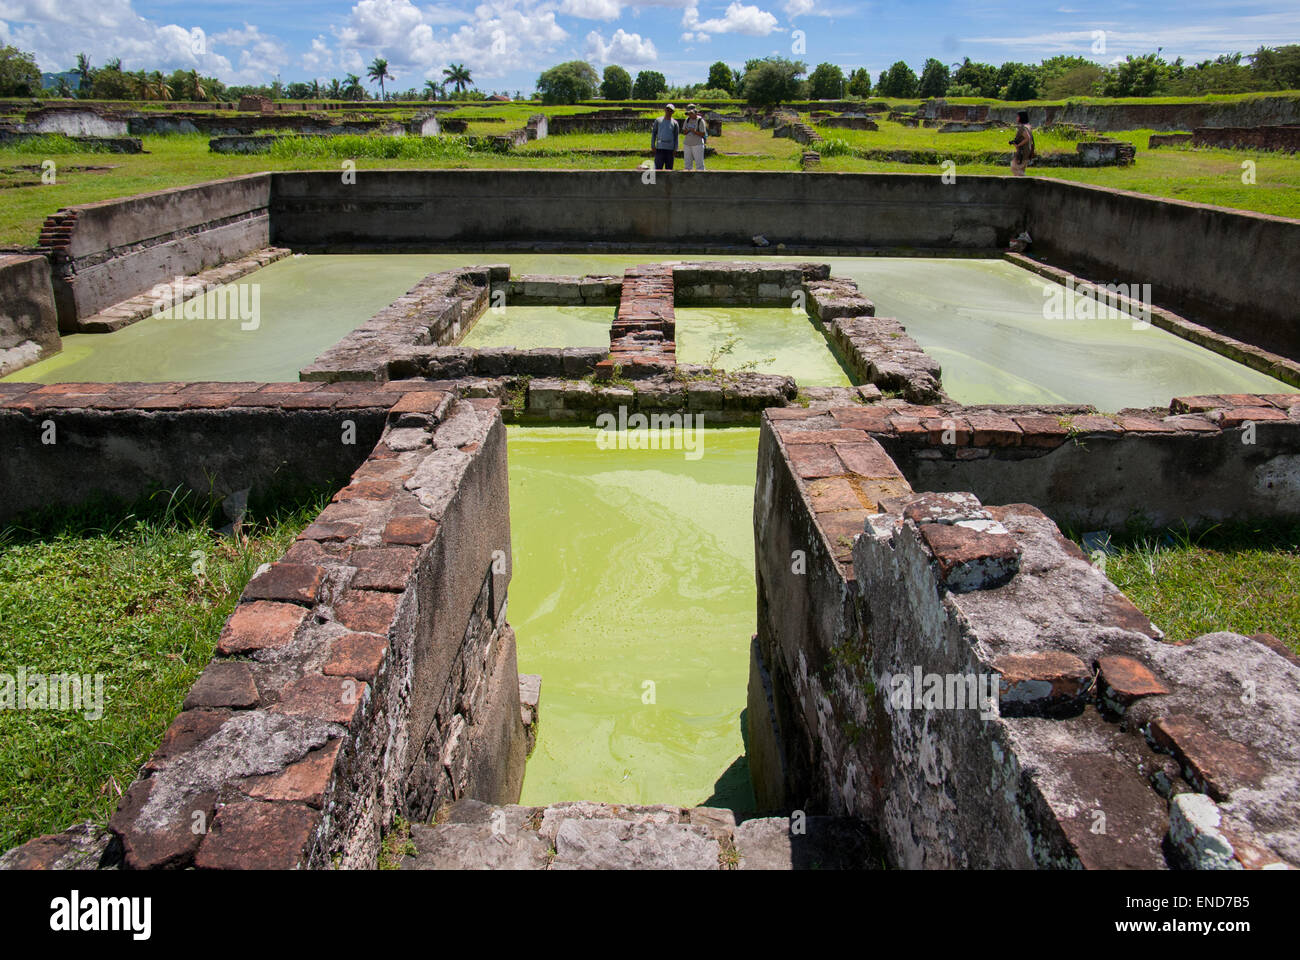 Ruin of a royal pool at Surosowan palace, a cultural heritage site of Banten Sultanate located in an area called Old Banten in Banten, Indonesia. Stock Photo